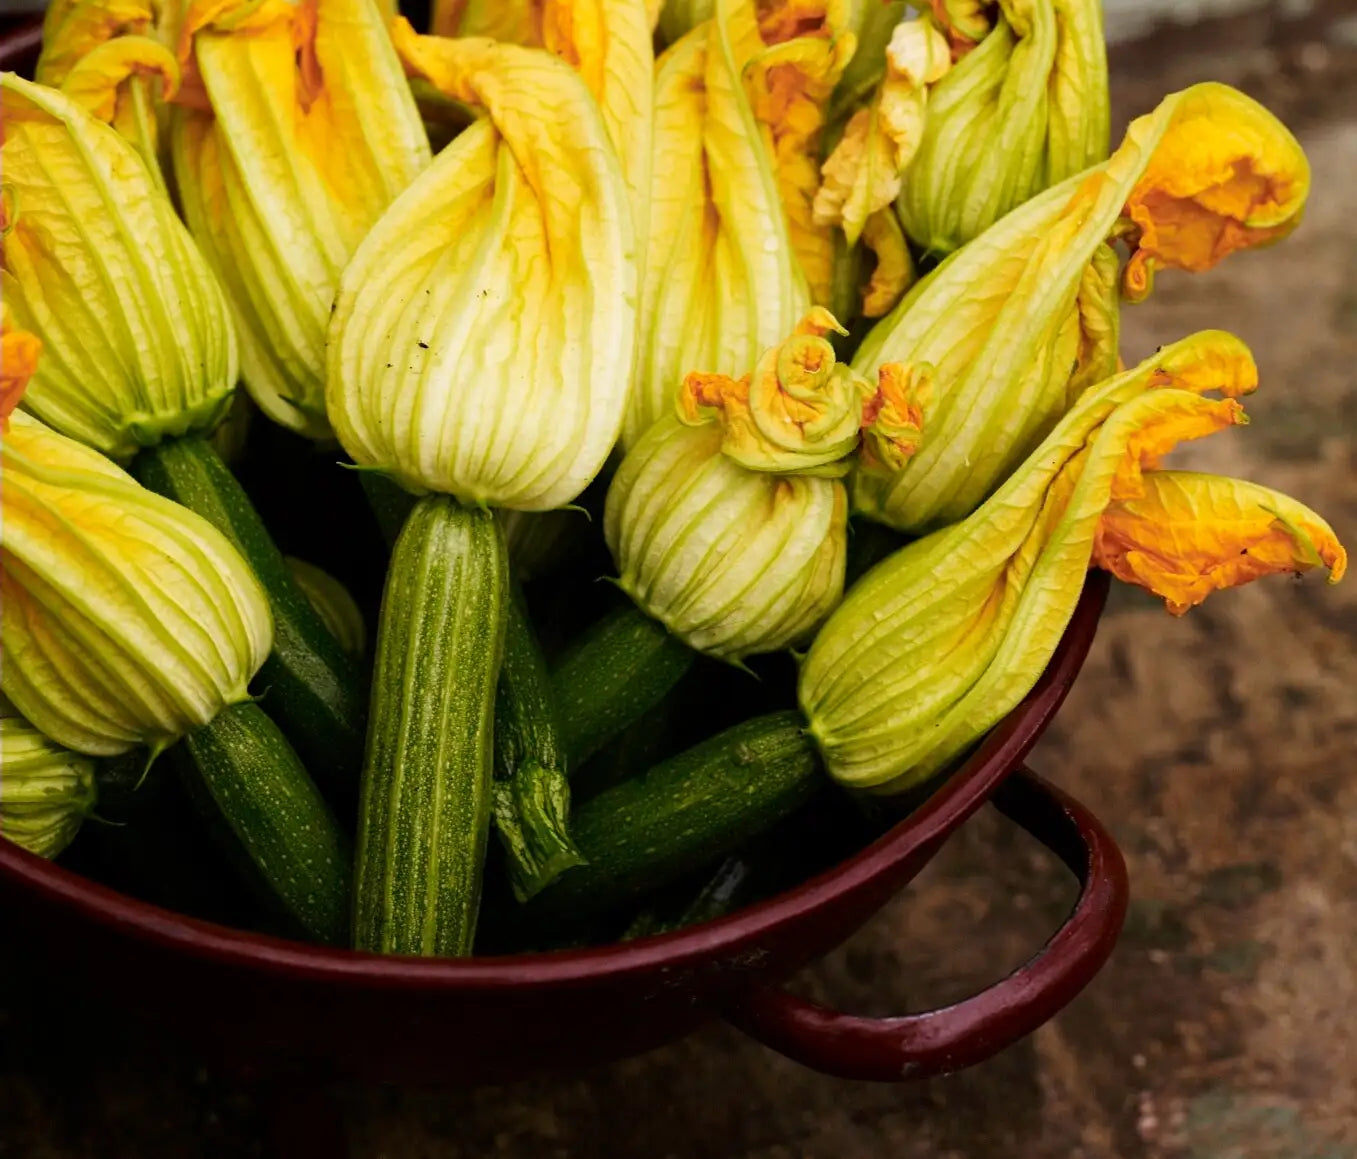 Courgettes in a bowl